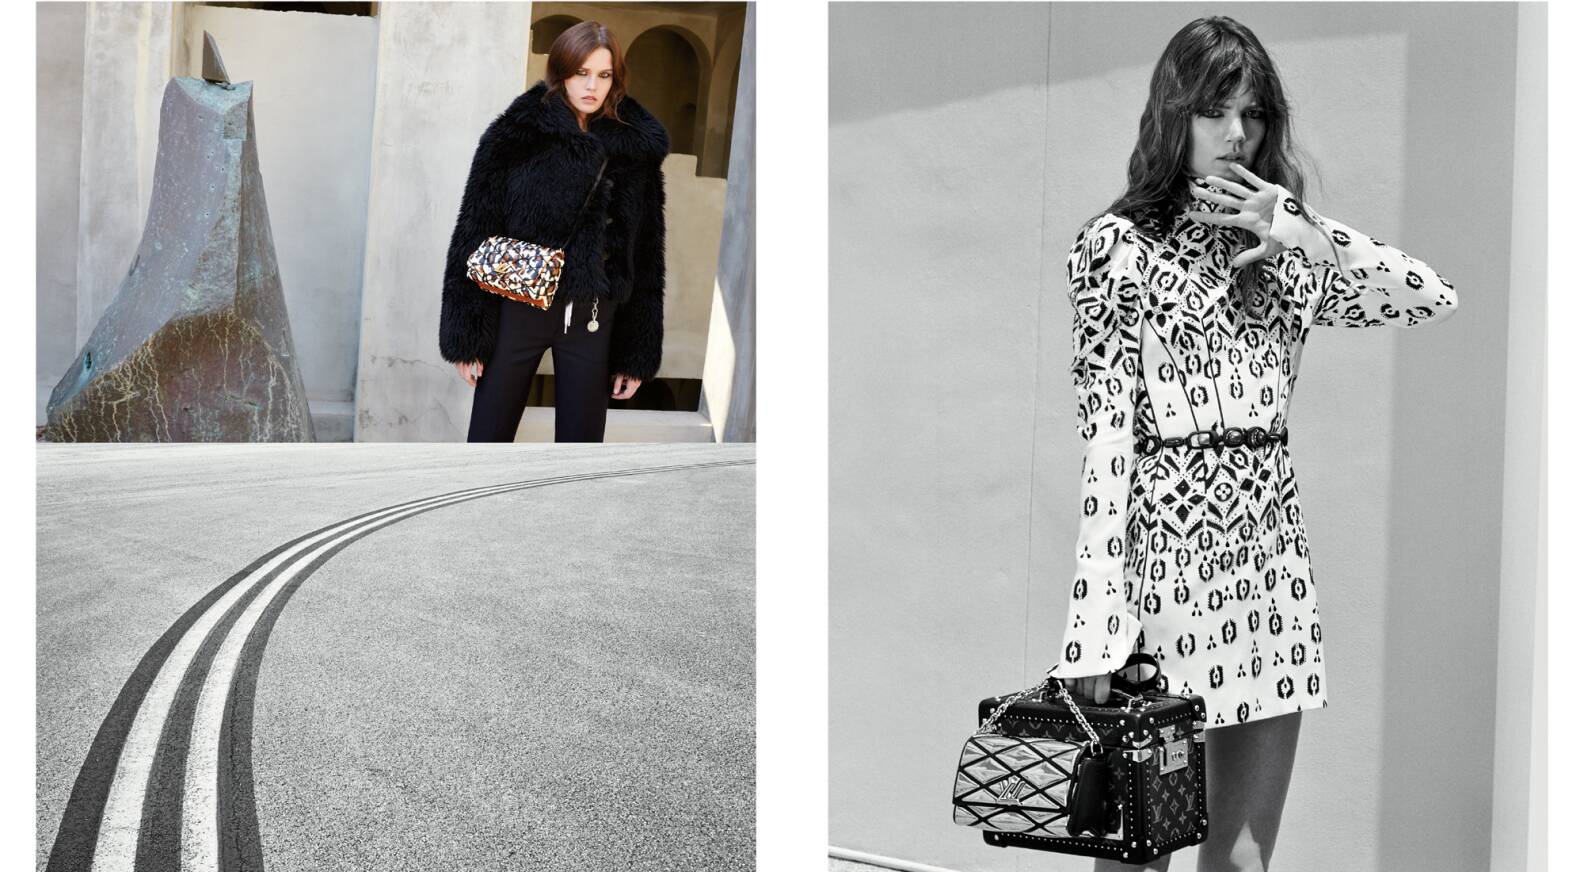 Louis Vuitton Fall 2010 womenswear Ad Campaign features three top